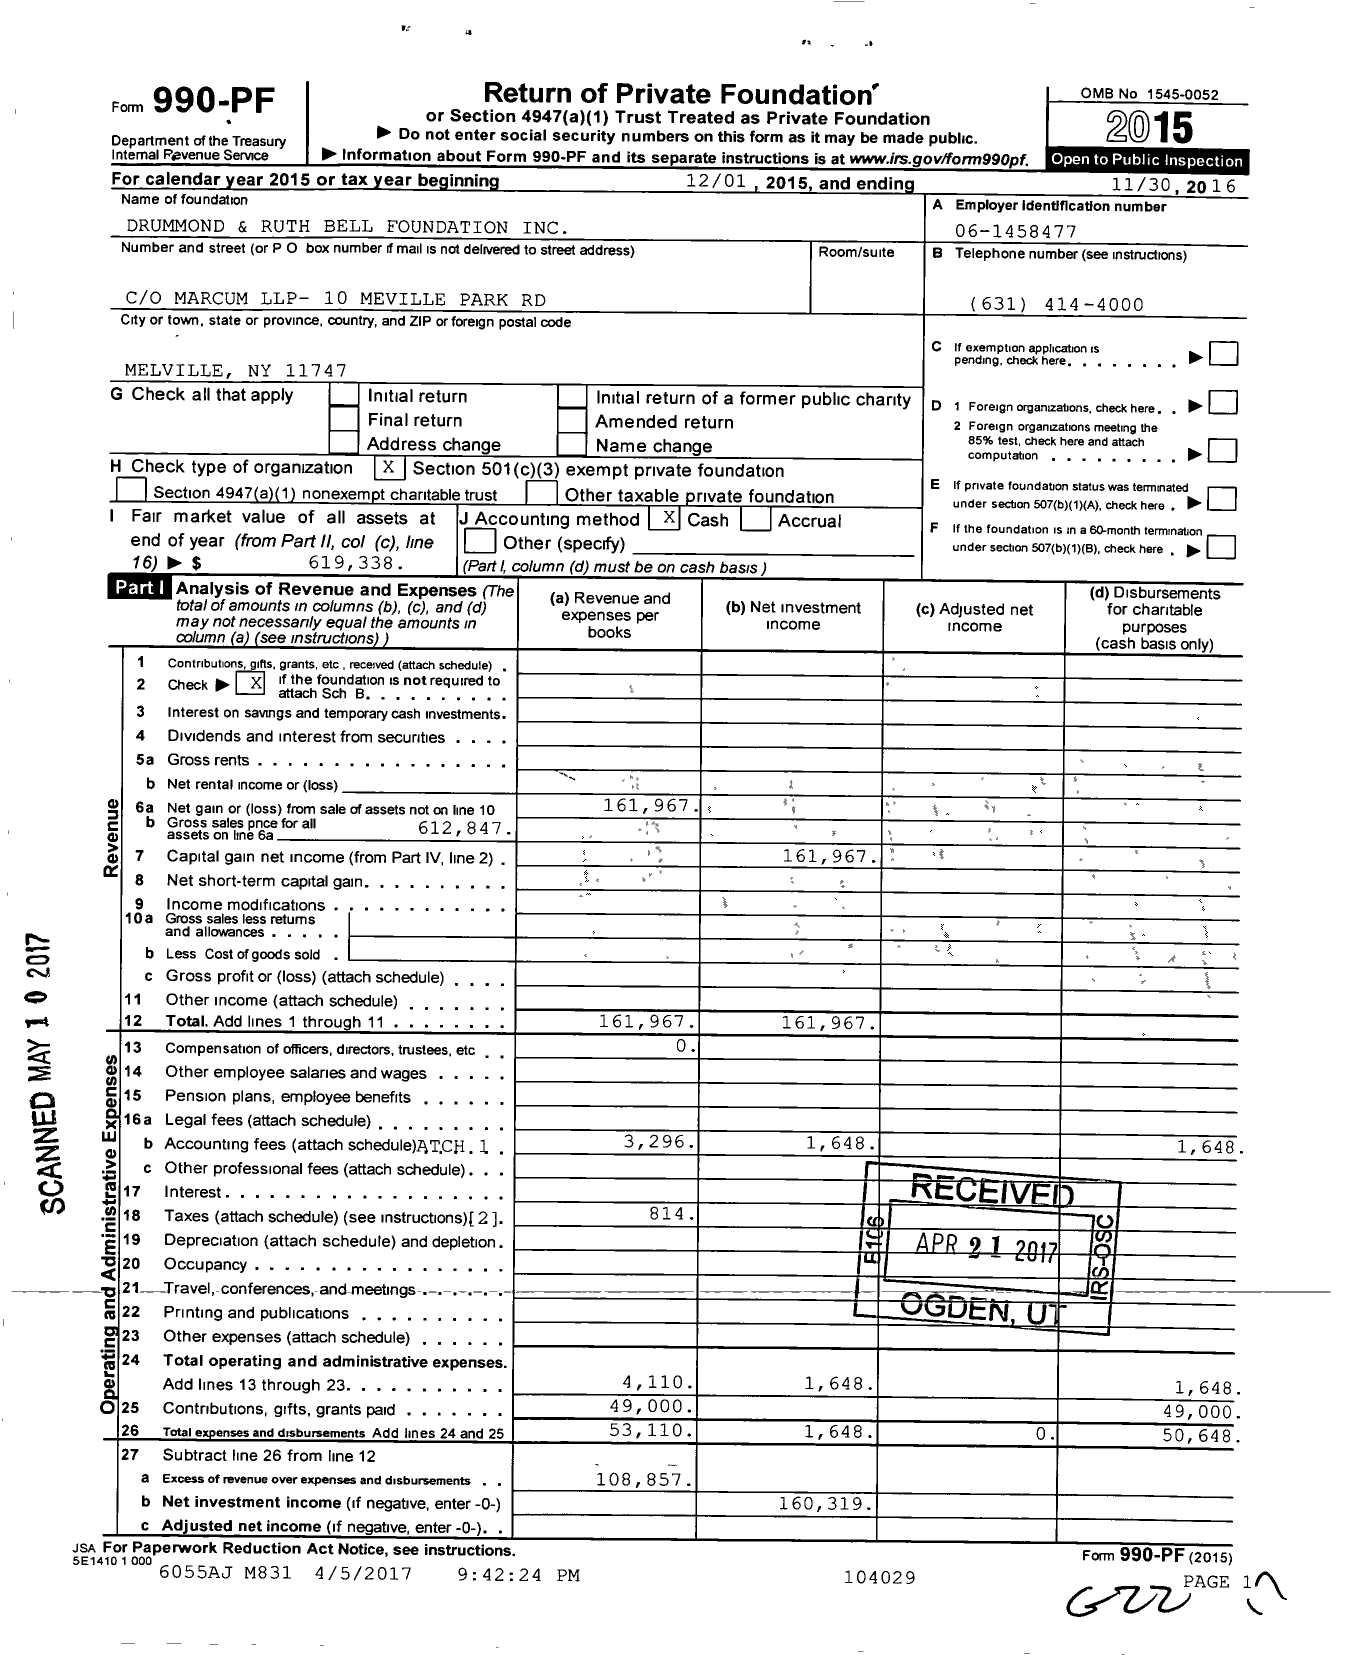 Image of first page of 2015 Form 990PF for Drummond and Ruth Bell Foundation